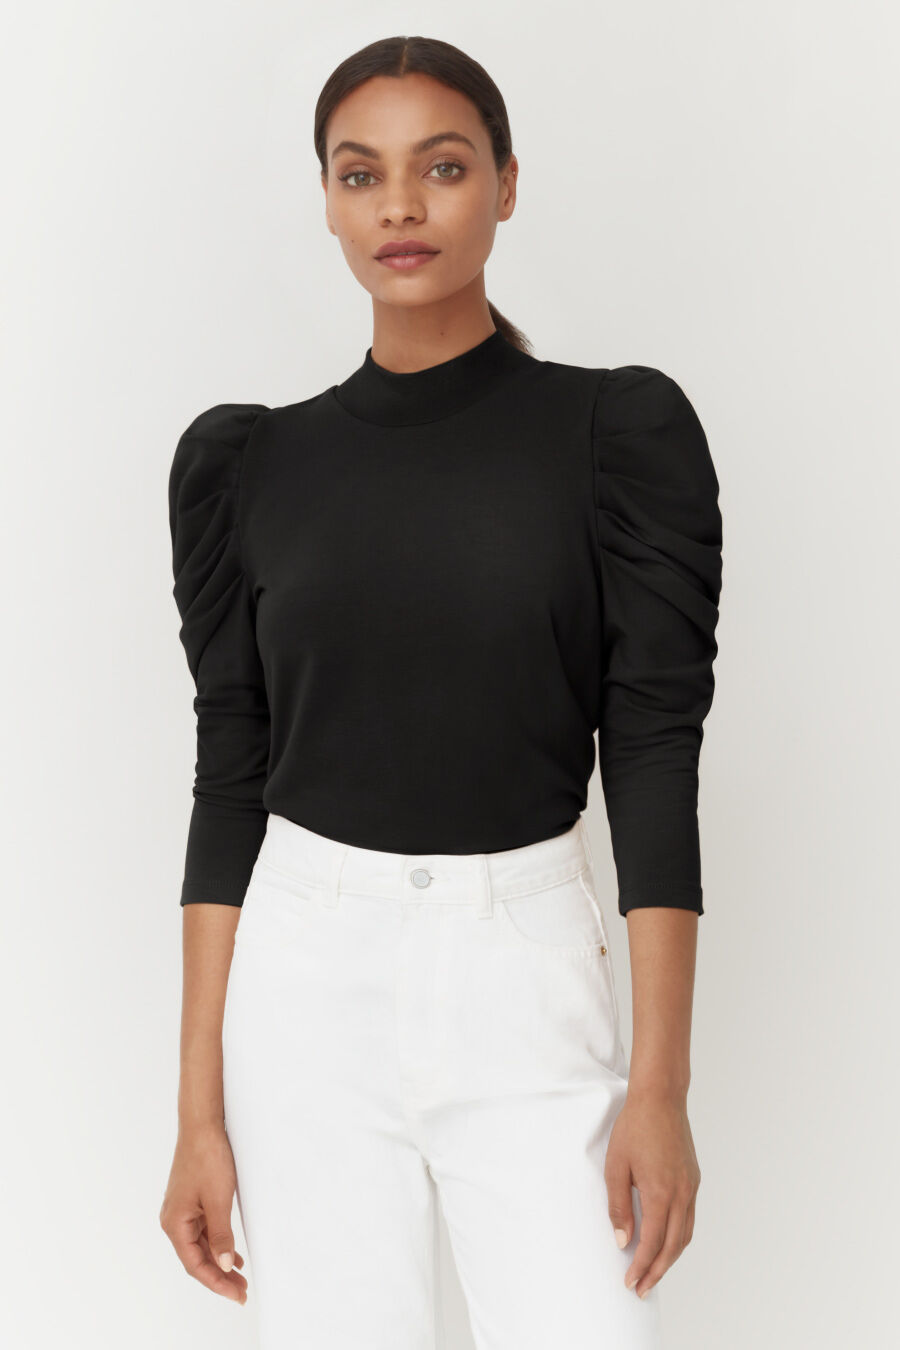 Woman in a turtleneck with puffed sleeves standing straight.